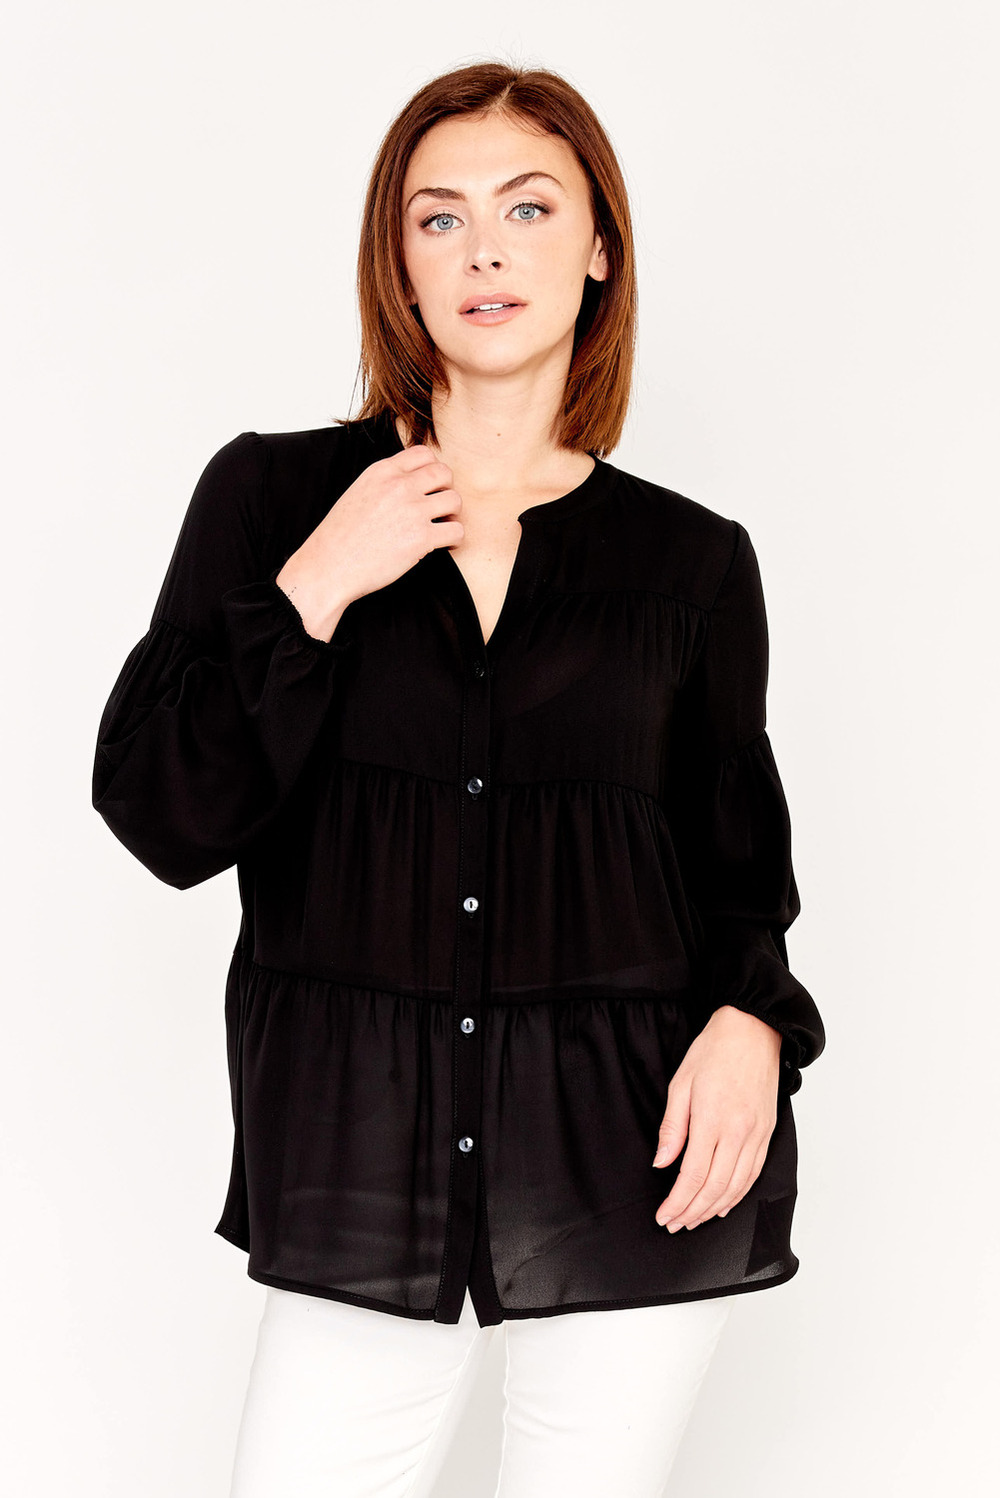 Long-Sleeve Button Up Blouse Style 231237. Black